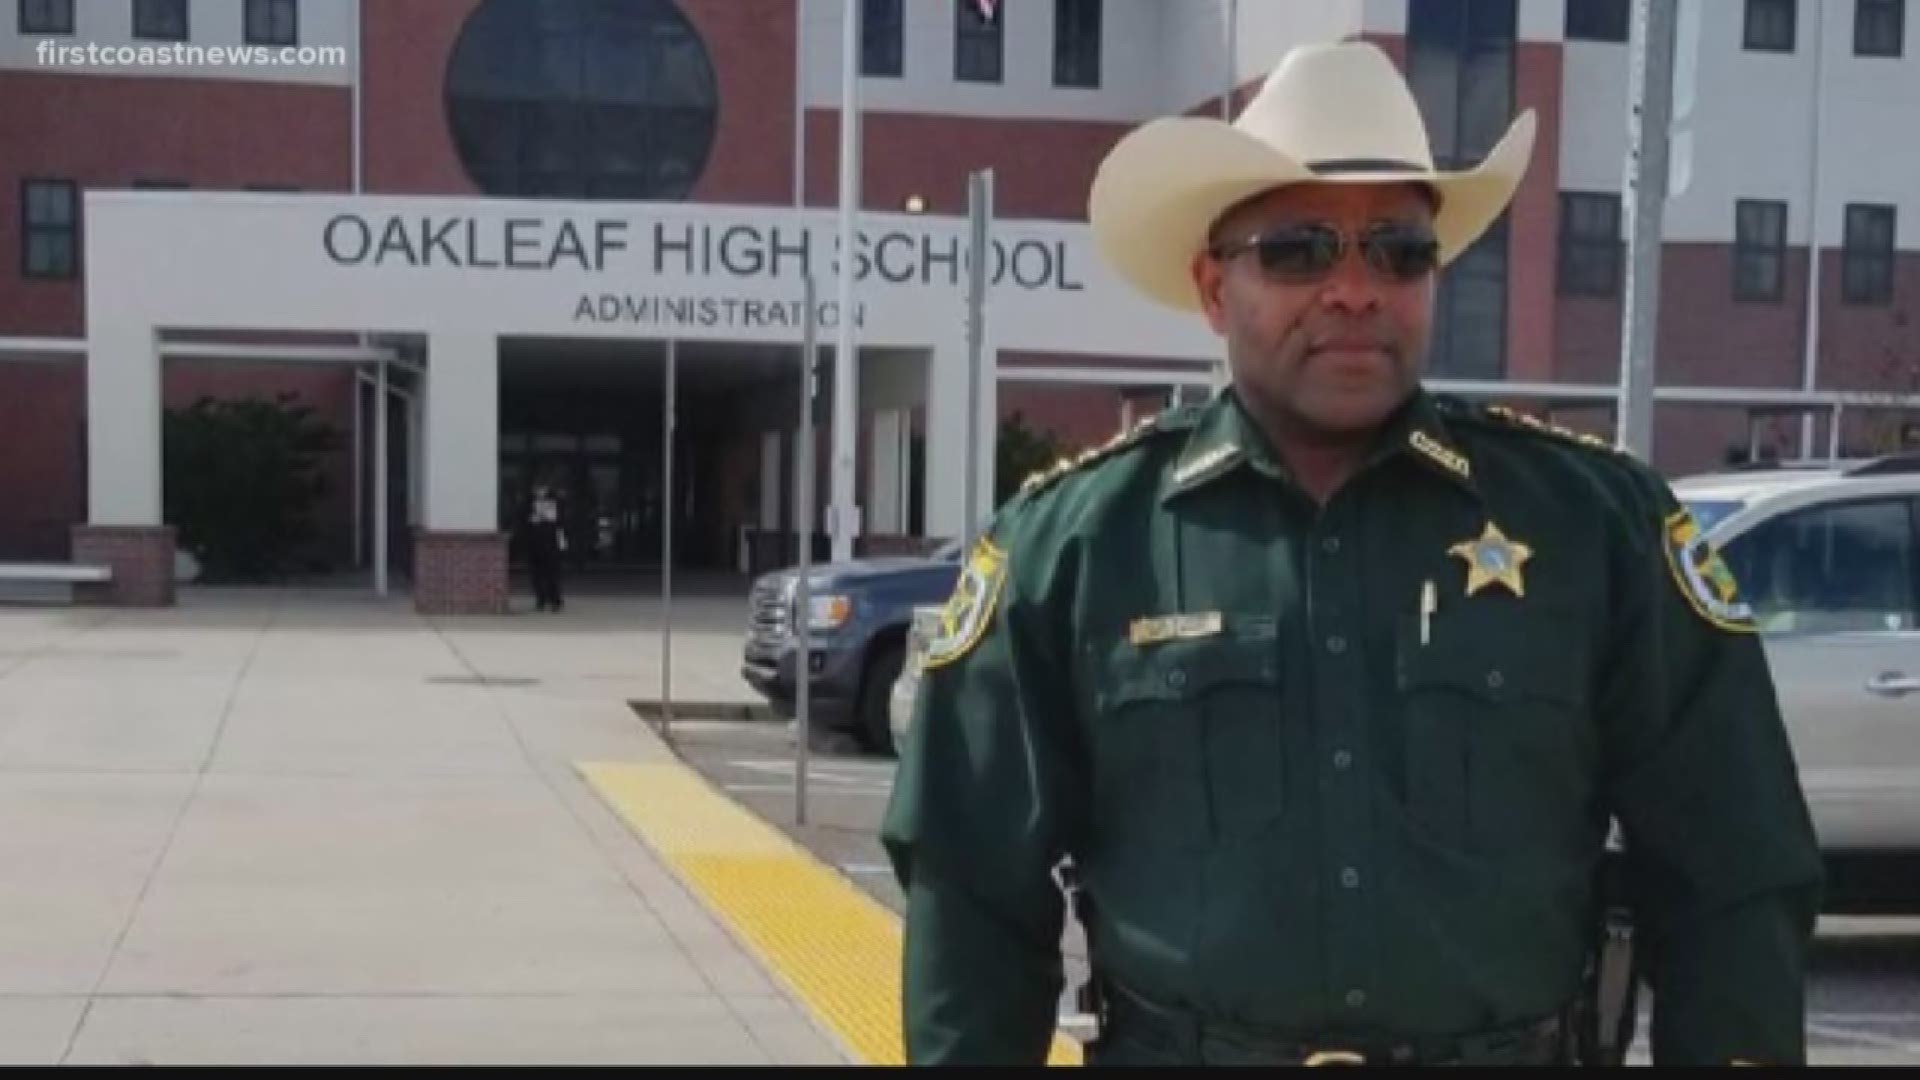 Revelations about an extramarital affair have been plaguing Clay County Sheriff Darryl Daniels since they became public as part of a Jacksonville Sheriff’s Office investigation which was released Monday.